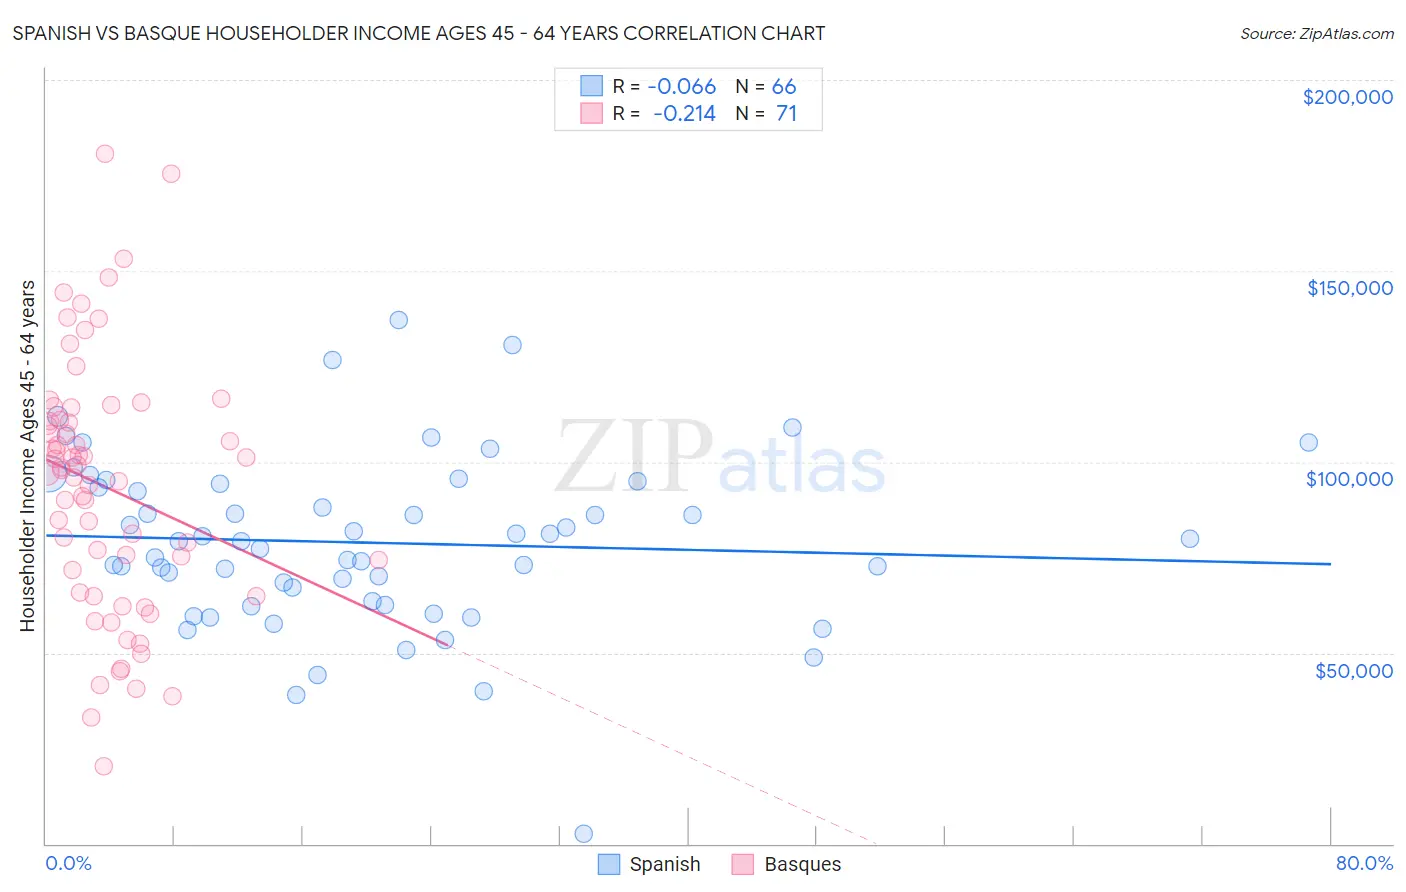 Spanish vs Basque Householder Income Ages 45 - 64 years